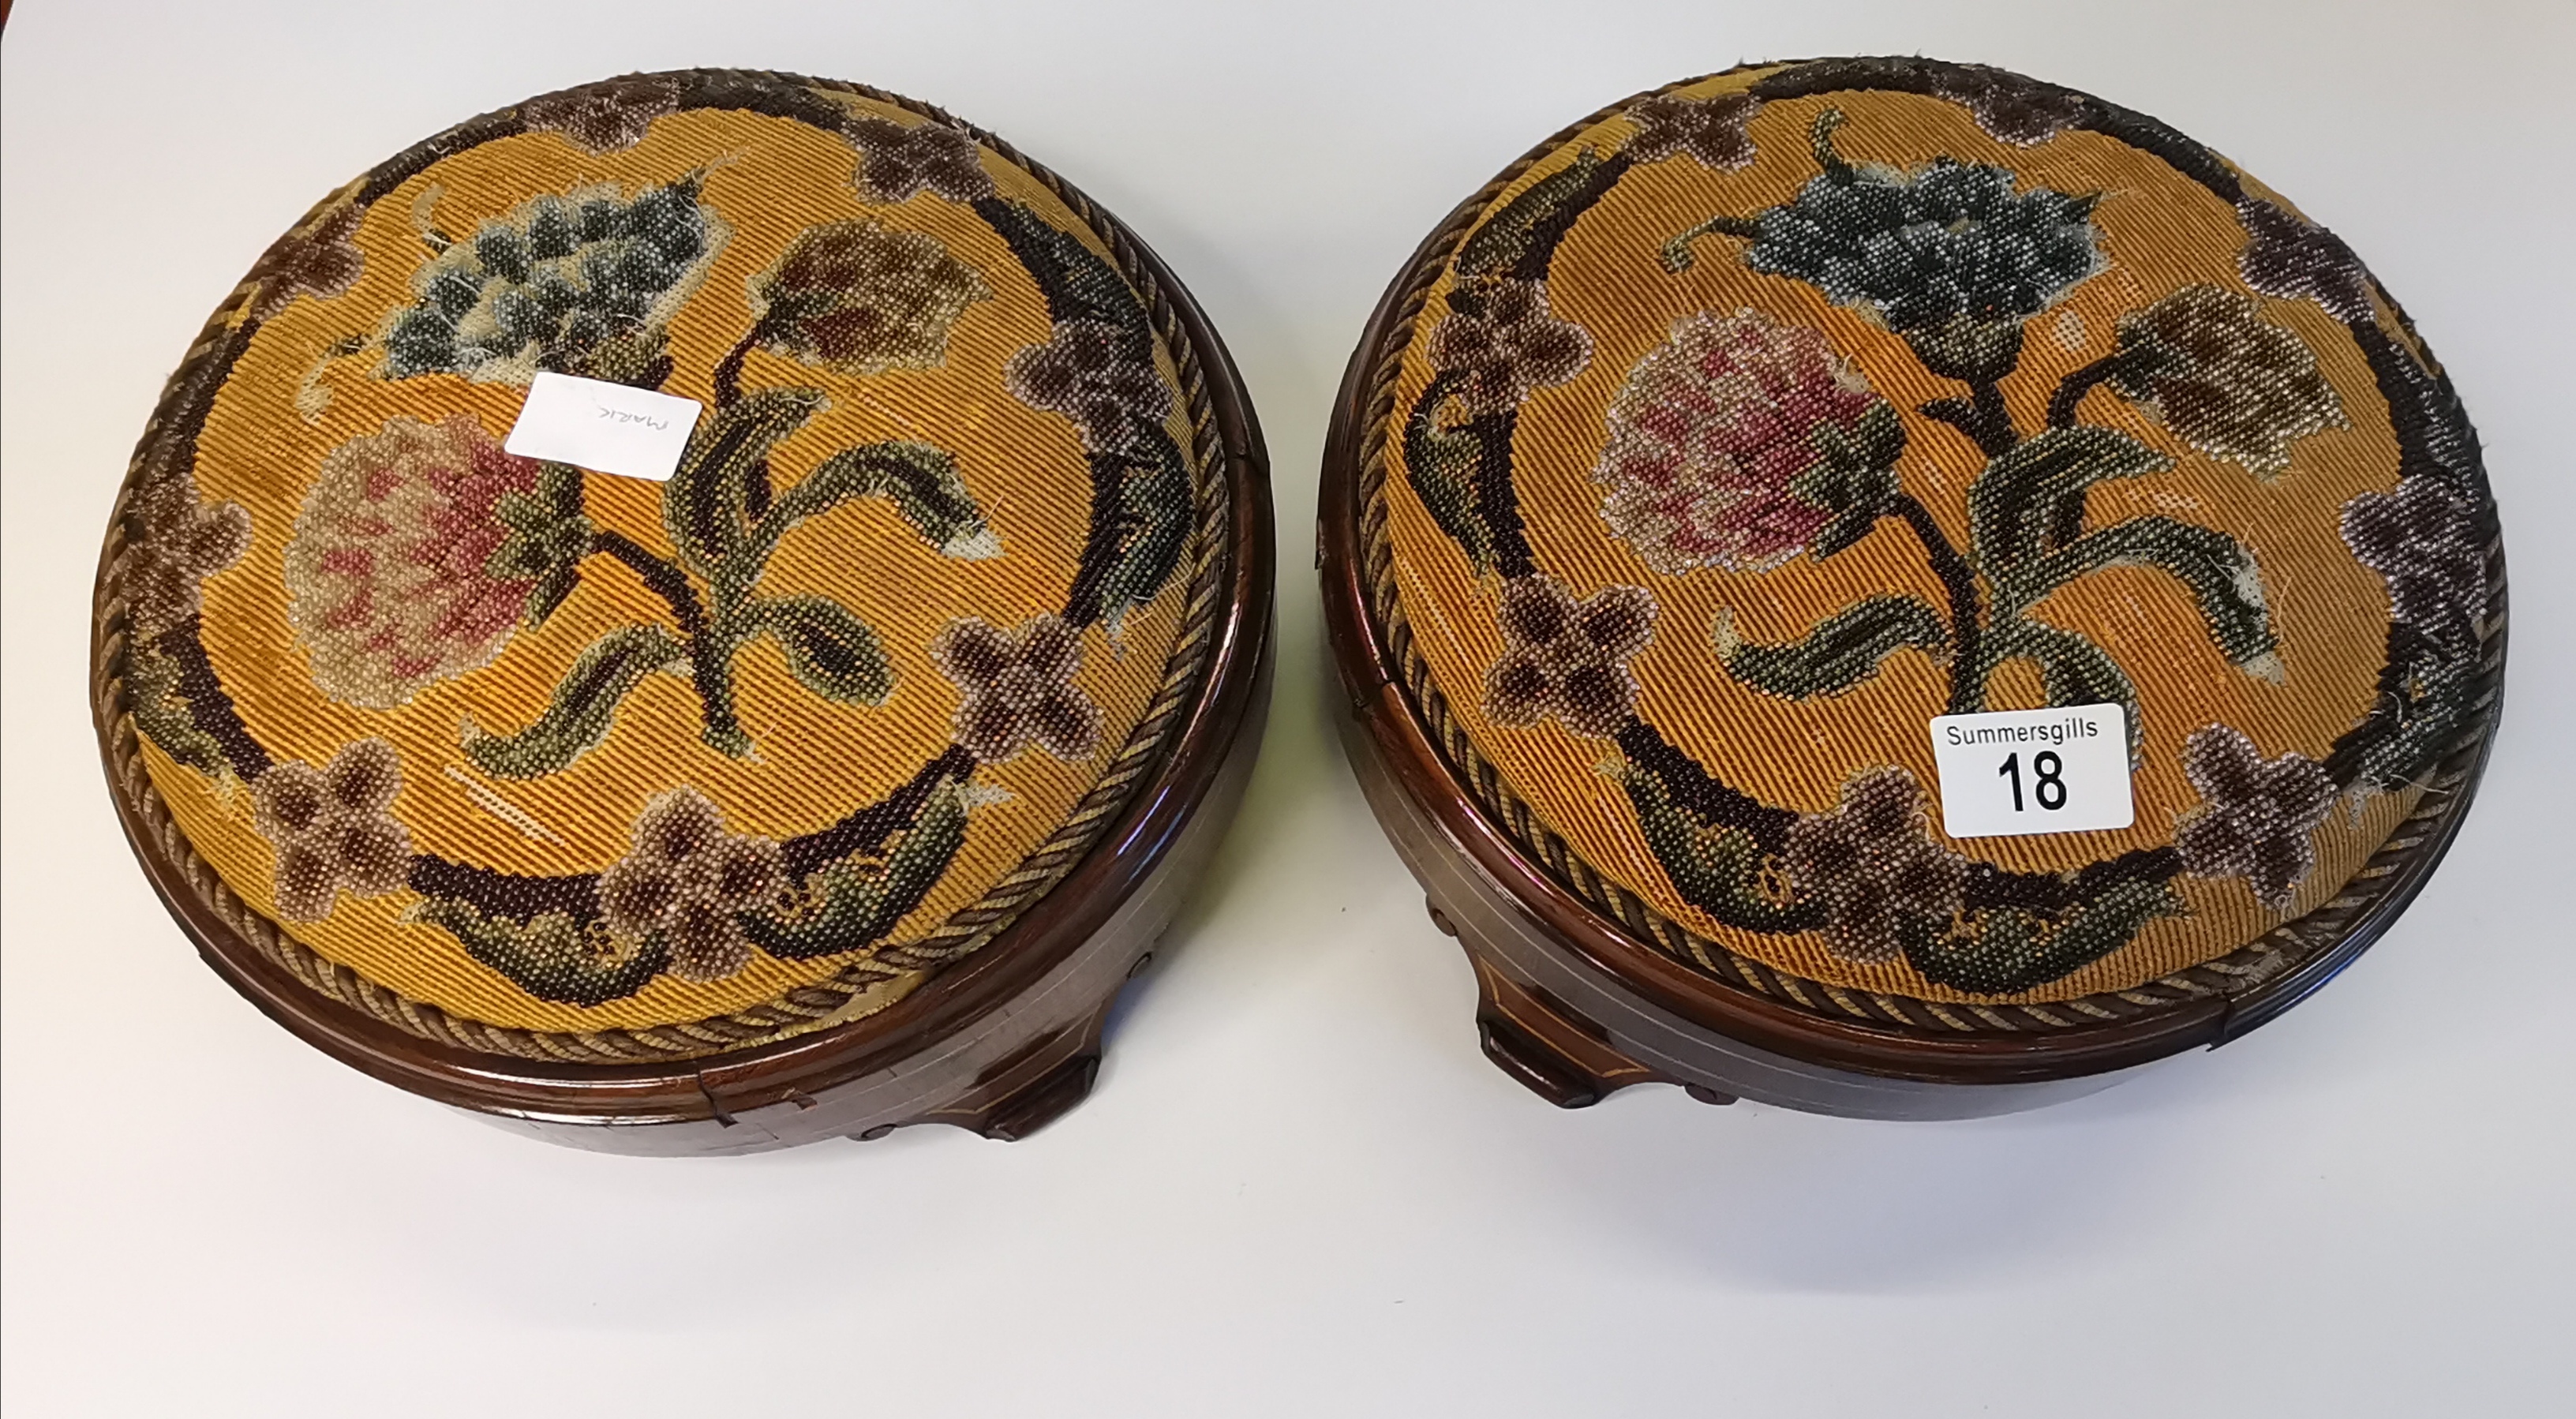 x2 Antique Embroidered footstools - Image 2 of 2